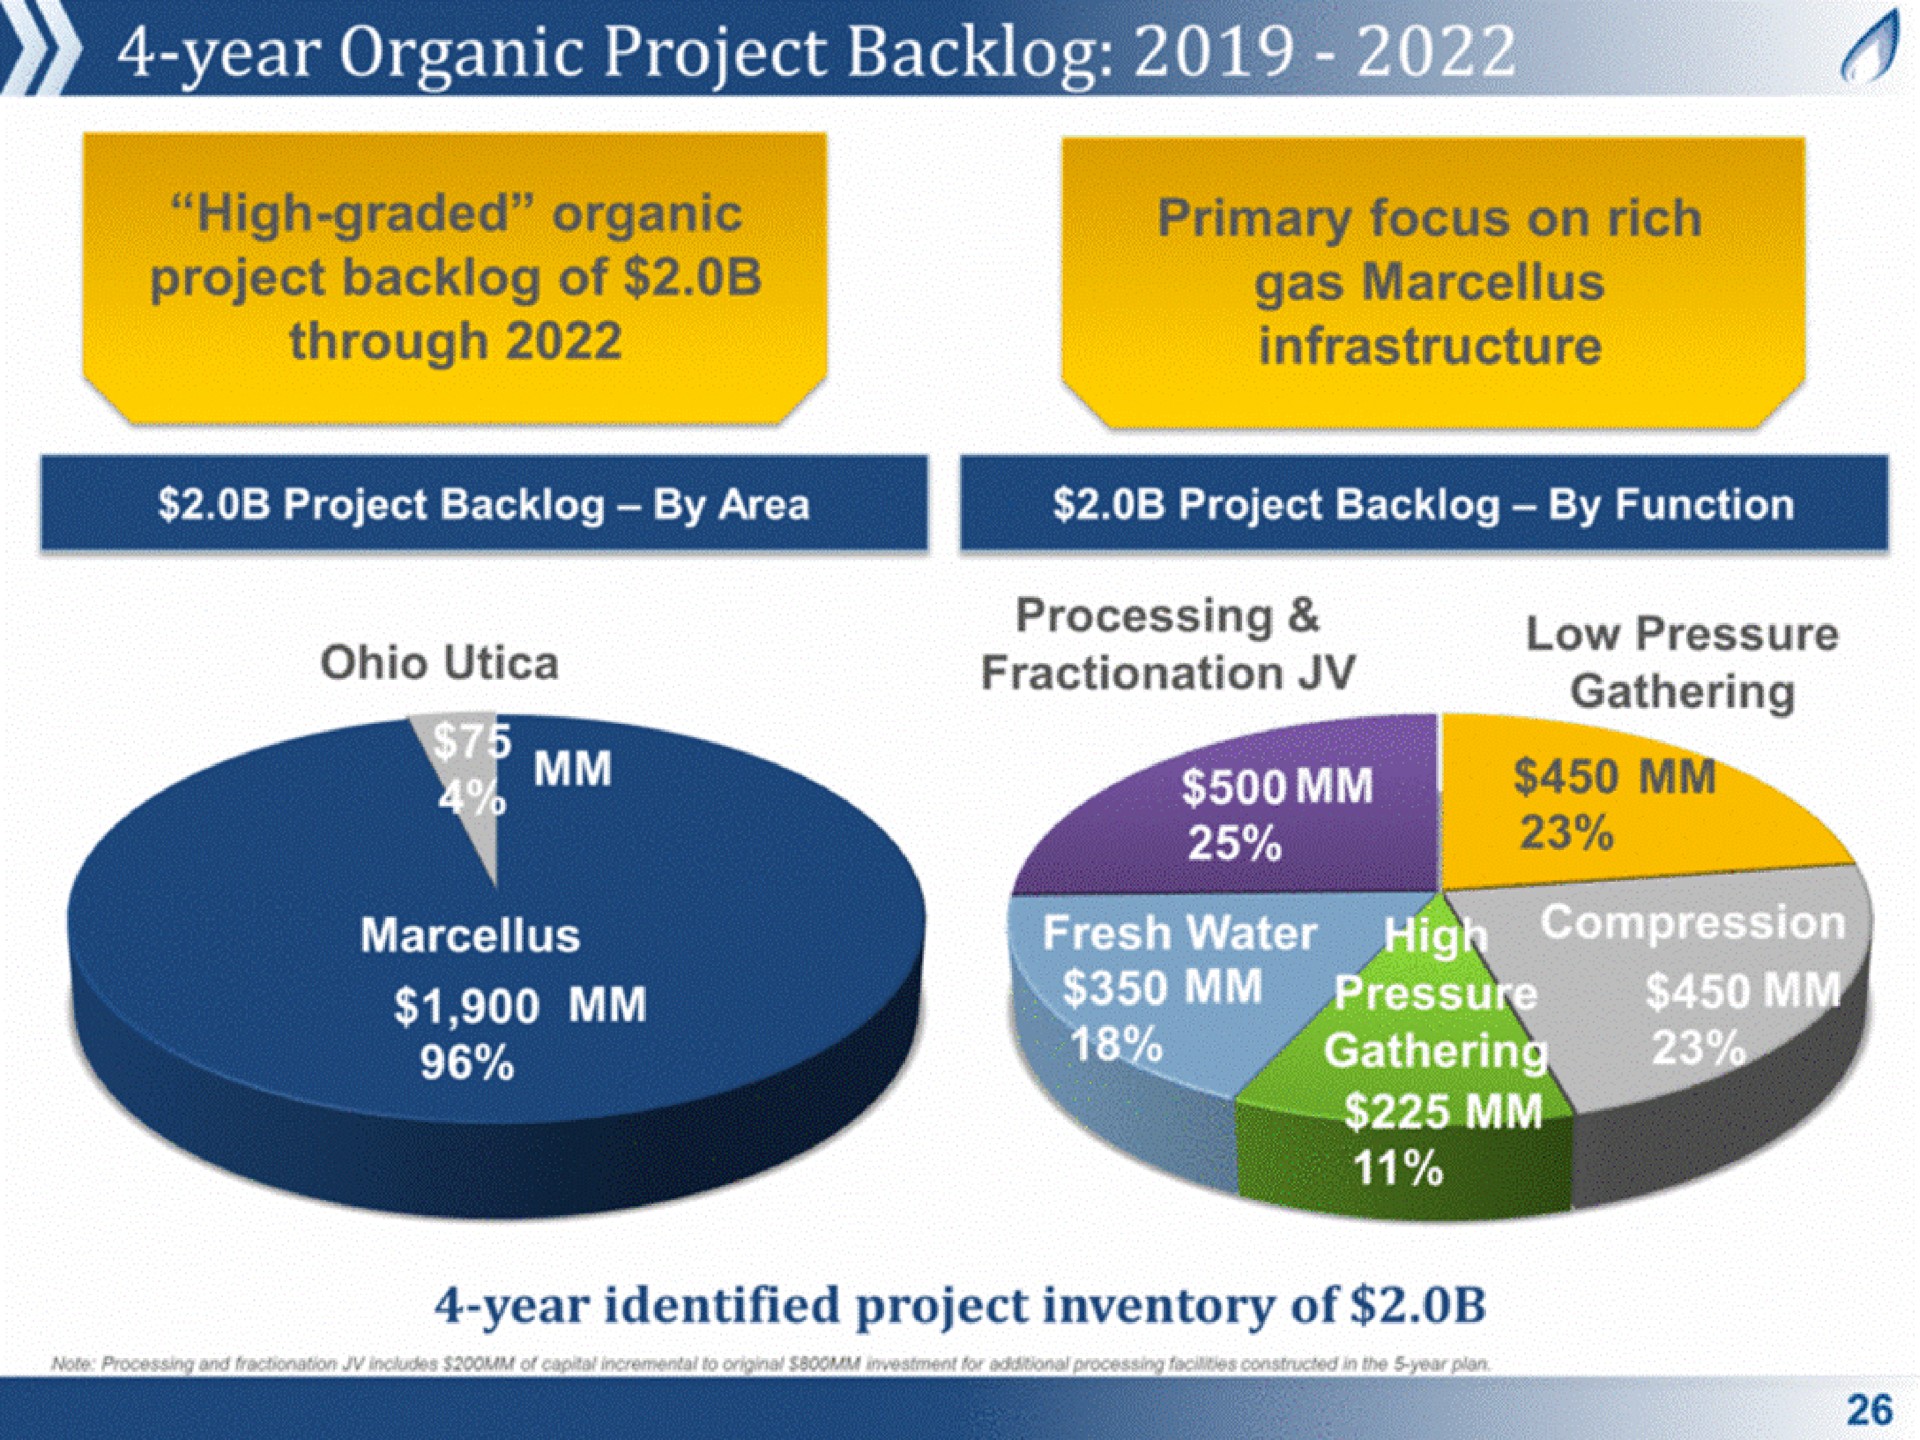 a or graded organic project backlog of through primary focus on gas infrastructure feces | Antero Midstream Partners